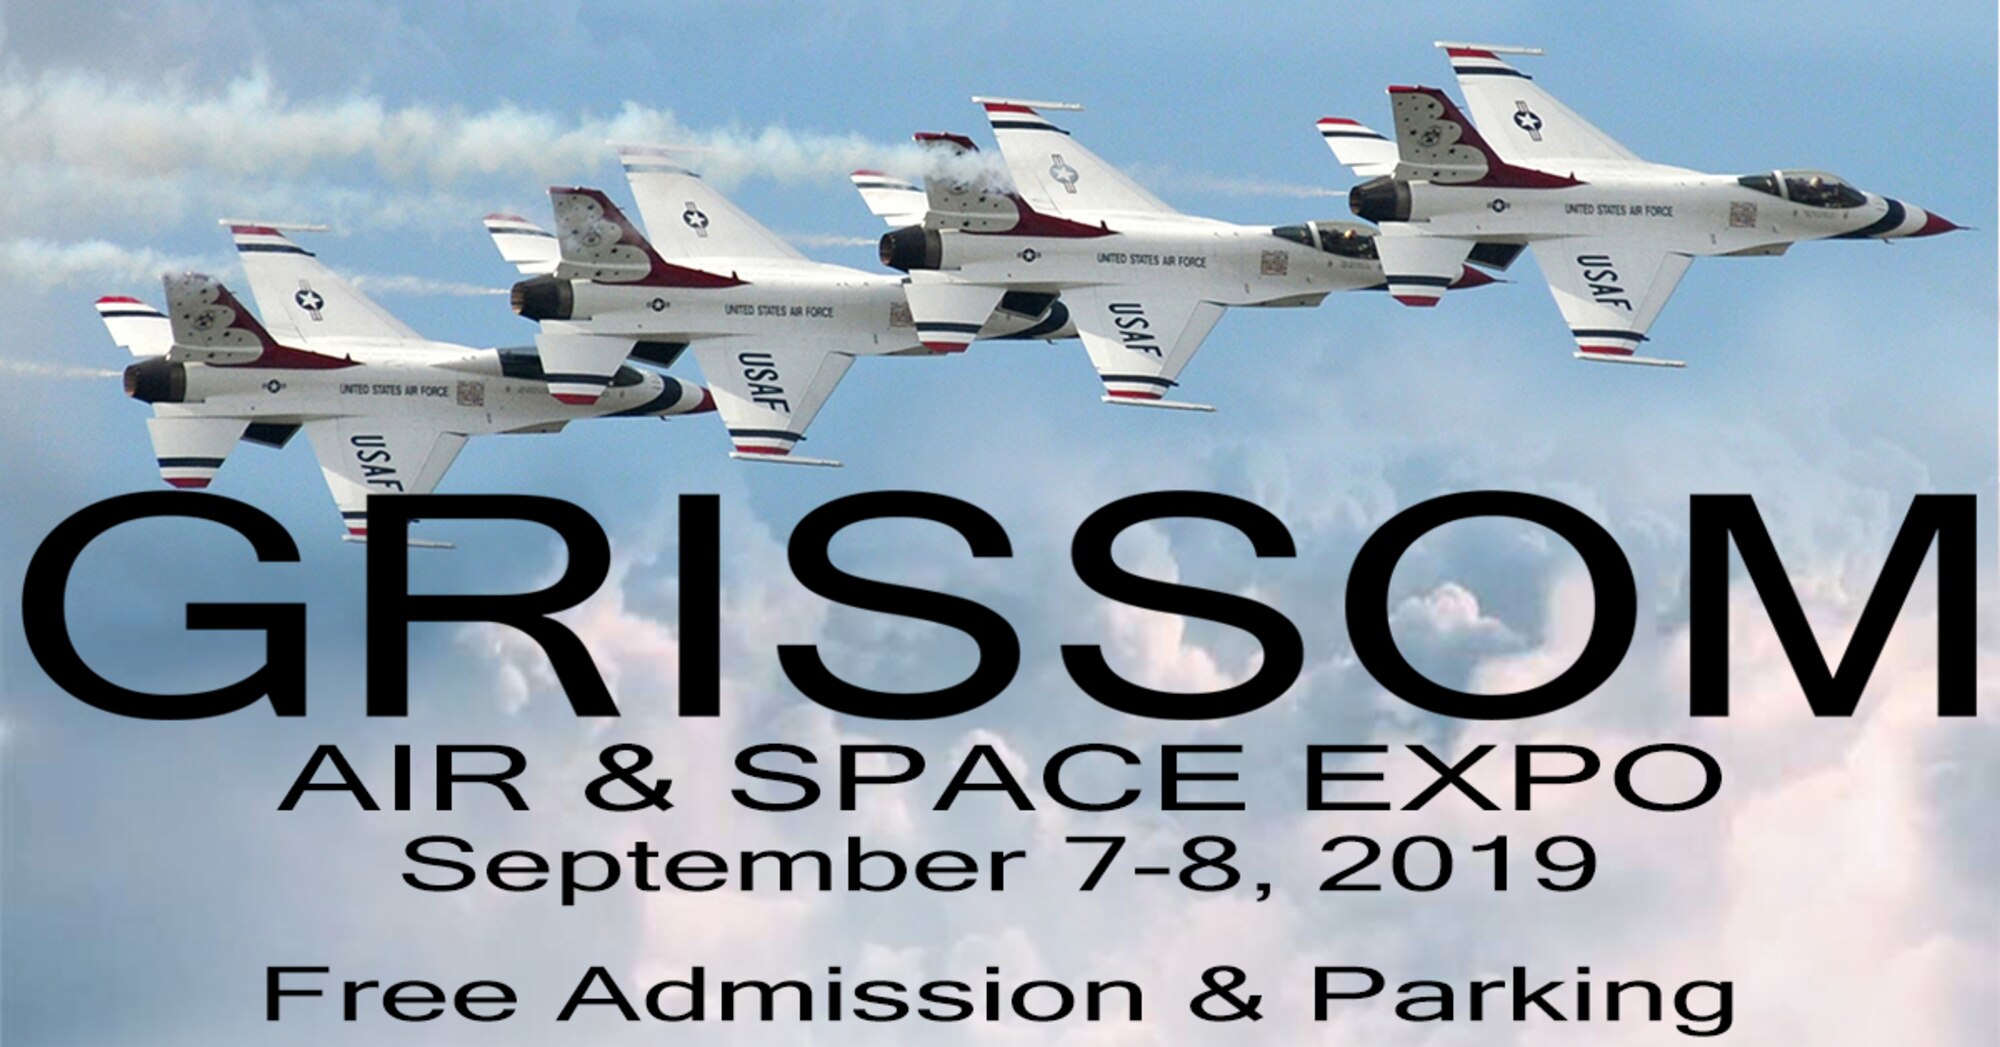 Grissom Air & Space Expo is scheduled for Sept. 7-8, 2019. The event is free to the public and includes free parking. www.grissomairshow.com (U.S. Air Force photo/Ben Mota)